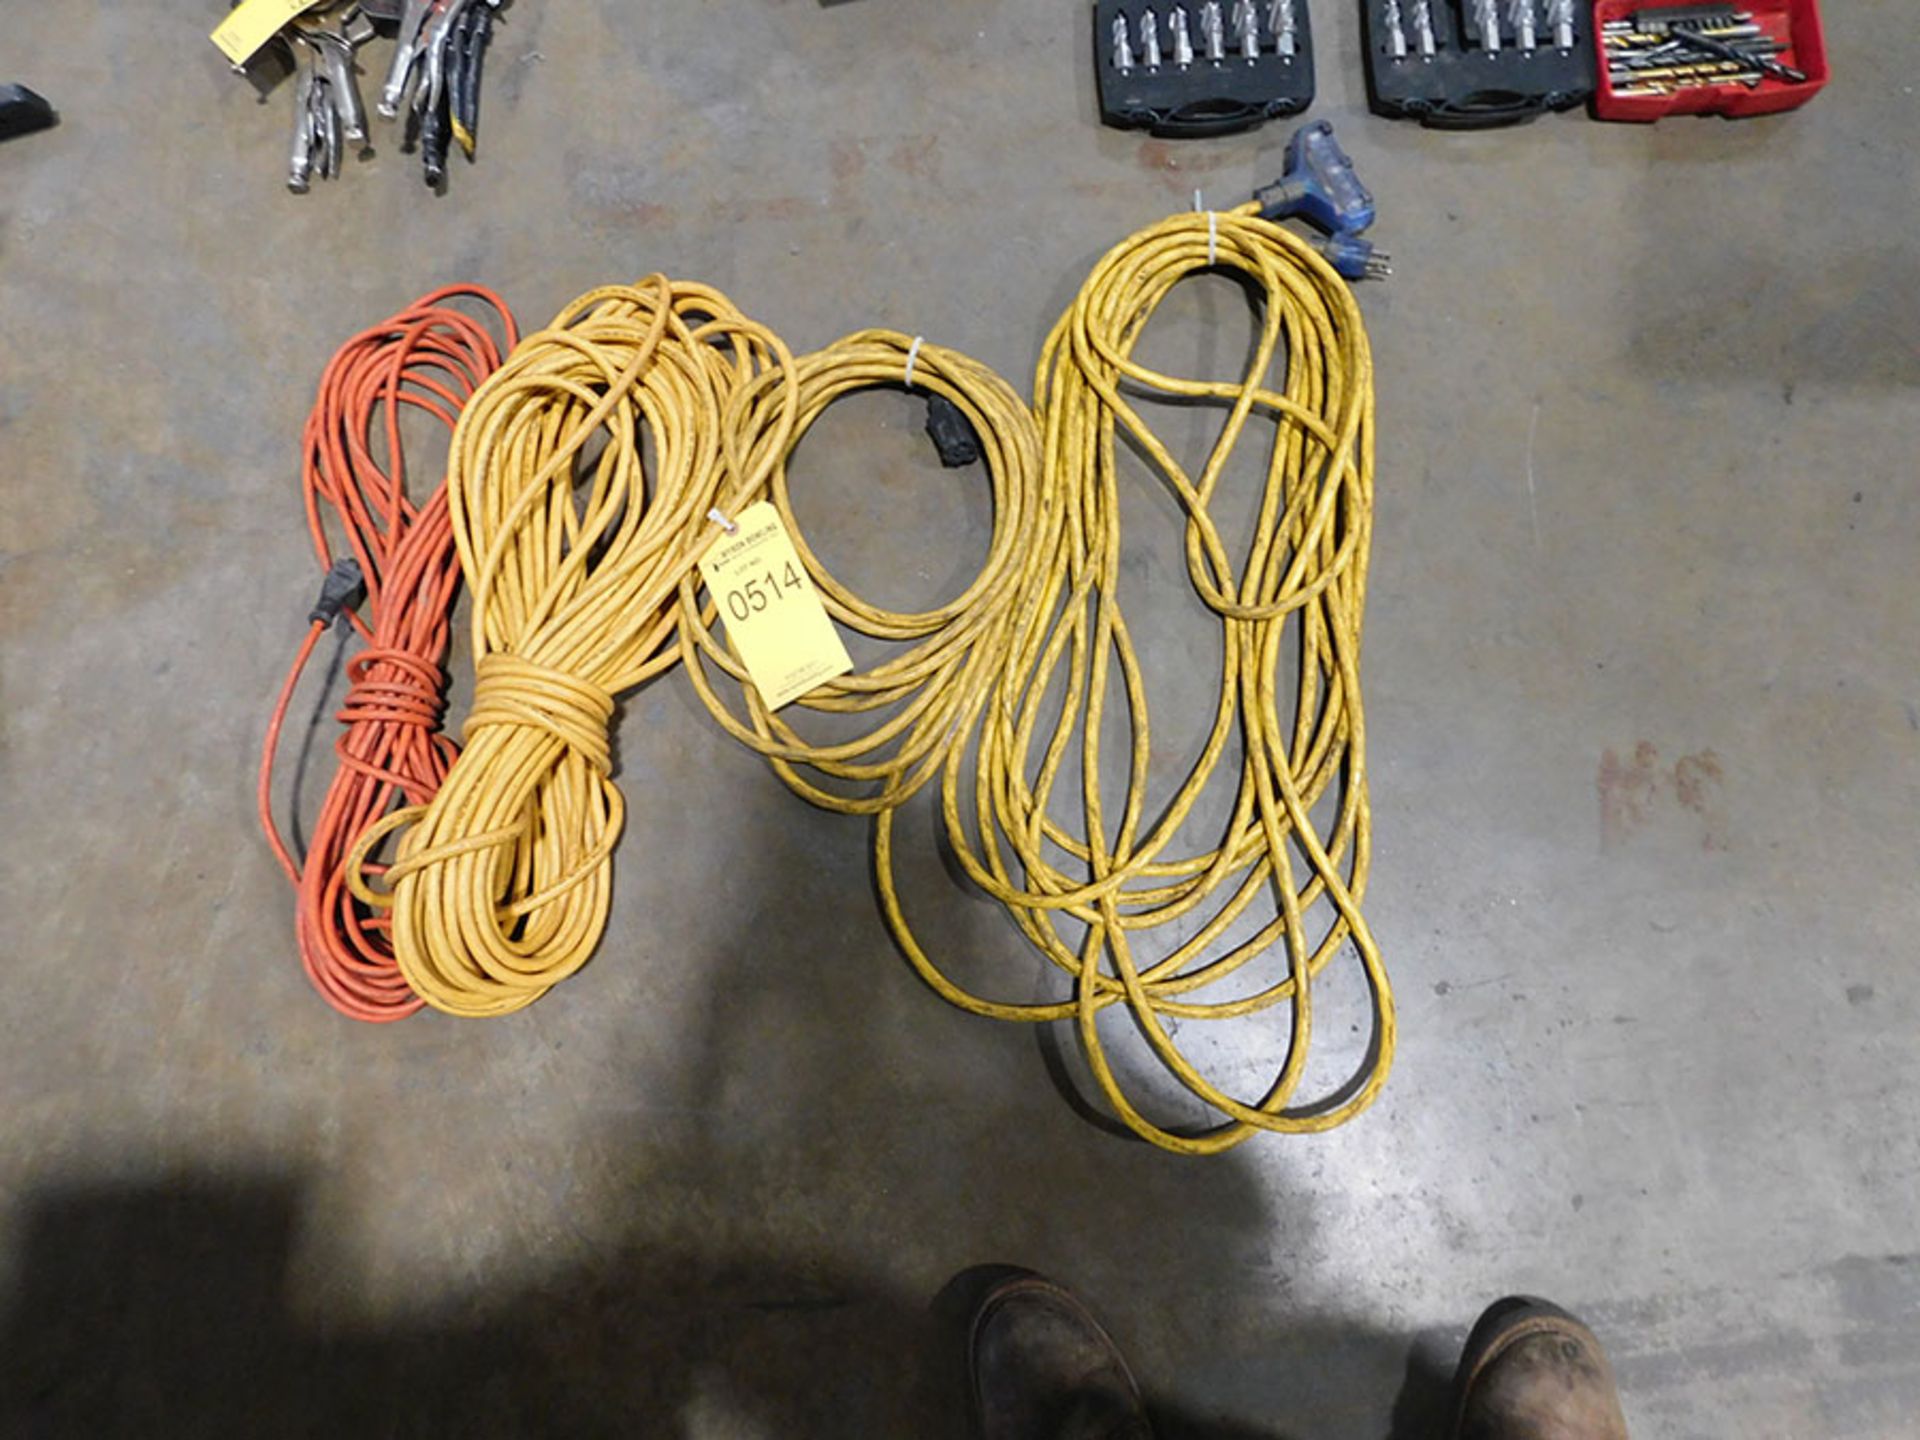 (4) EXTENSION CORDS